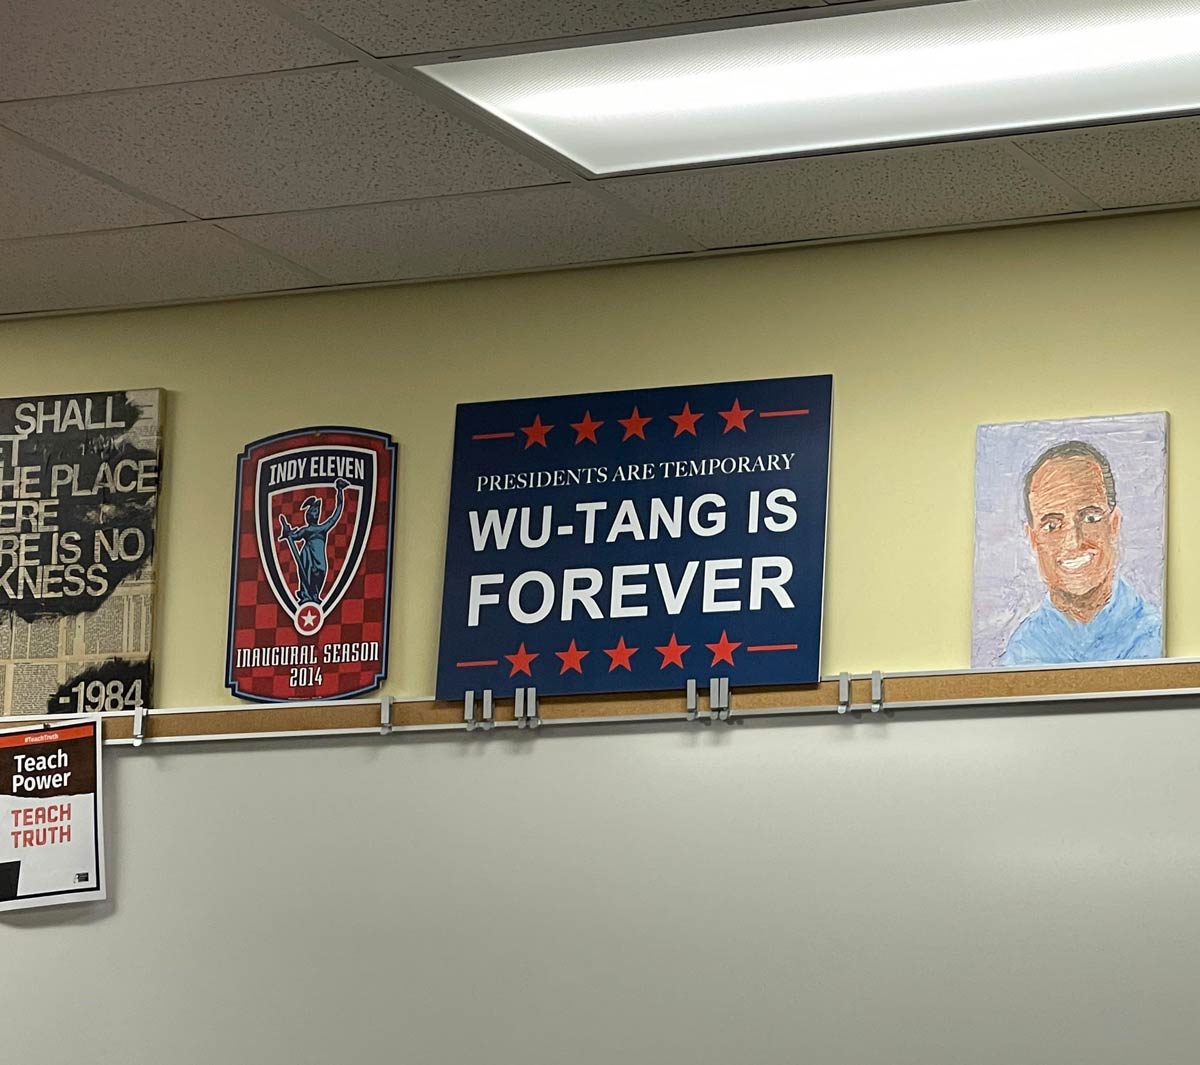 This is hanging in my son's world history classroom